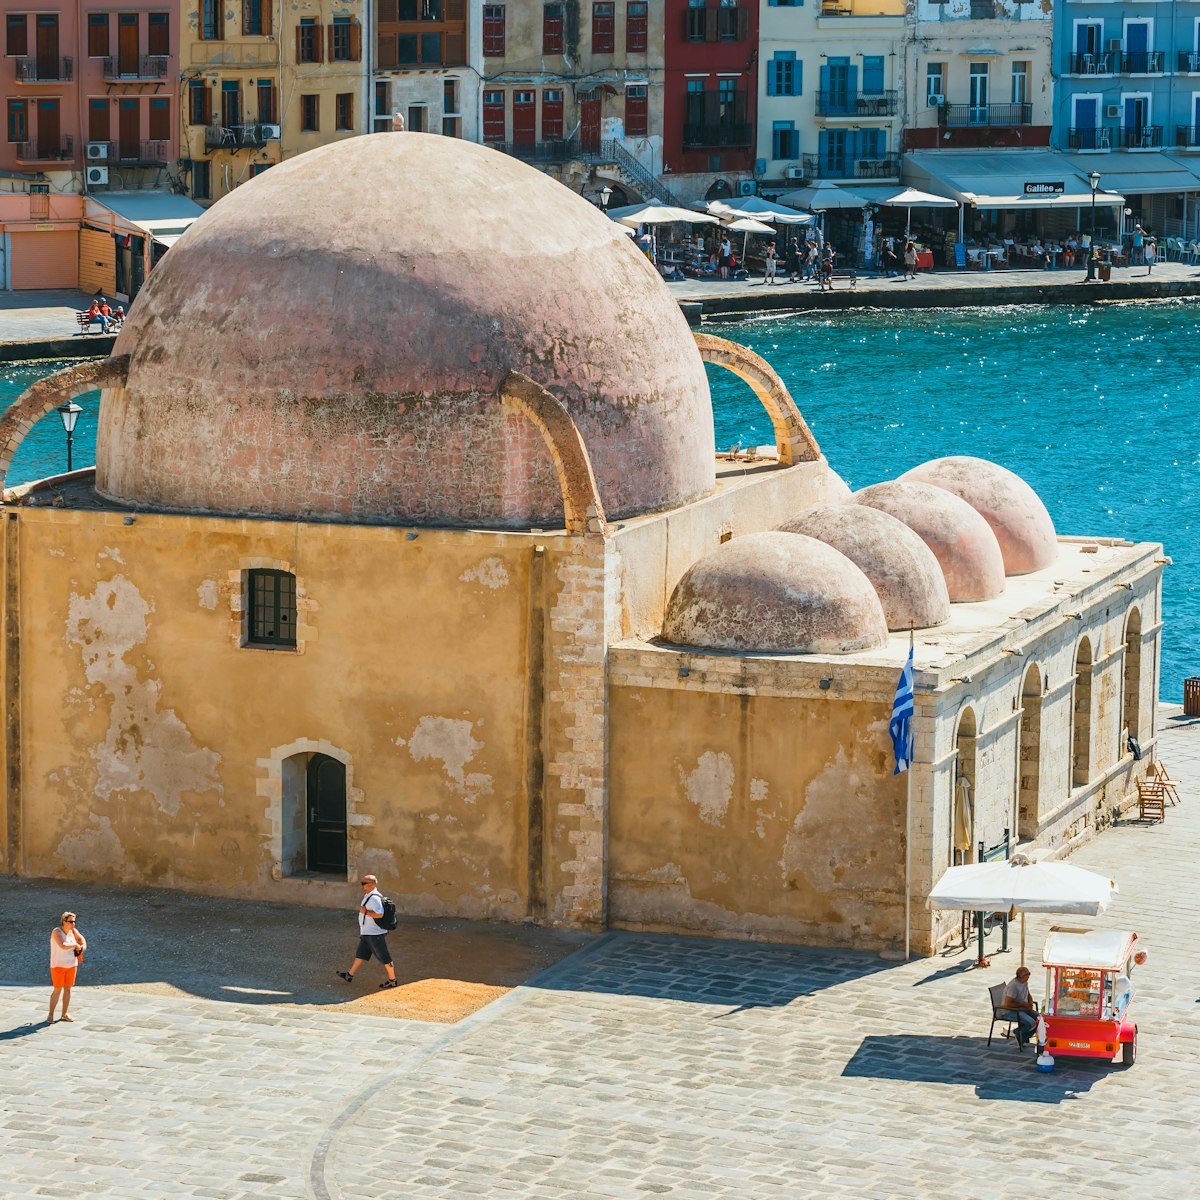 23 May 2016: Exterior of the historic mosque in the old port of Chania.
1053739037
aegean, architecture, bay, beautiful, beauty, blue, building, chania, city, cityscape, coast, coastline, crete, europe, european, greece, greek, hania, harbor, harbour, holiday, house, island, landmark, landscape, mediterranean, mosque, nature, old, people, pier, port, quay, scene, scenery, sea, sky, stone, summer, sun, sunny, tourism, tourist, town, travel, venetian, view, water, xania